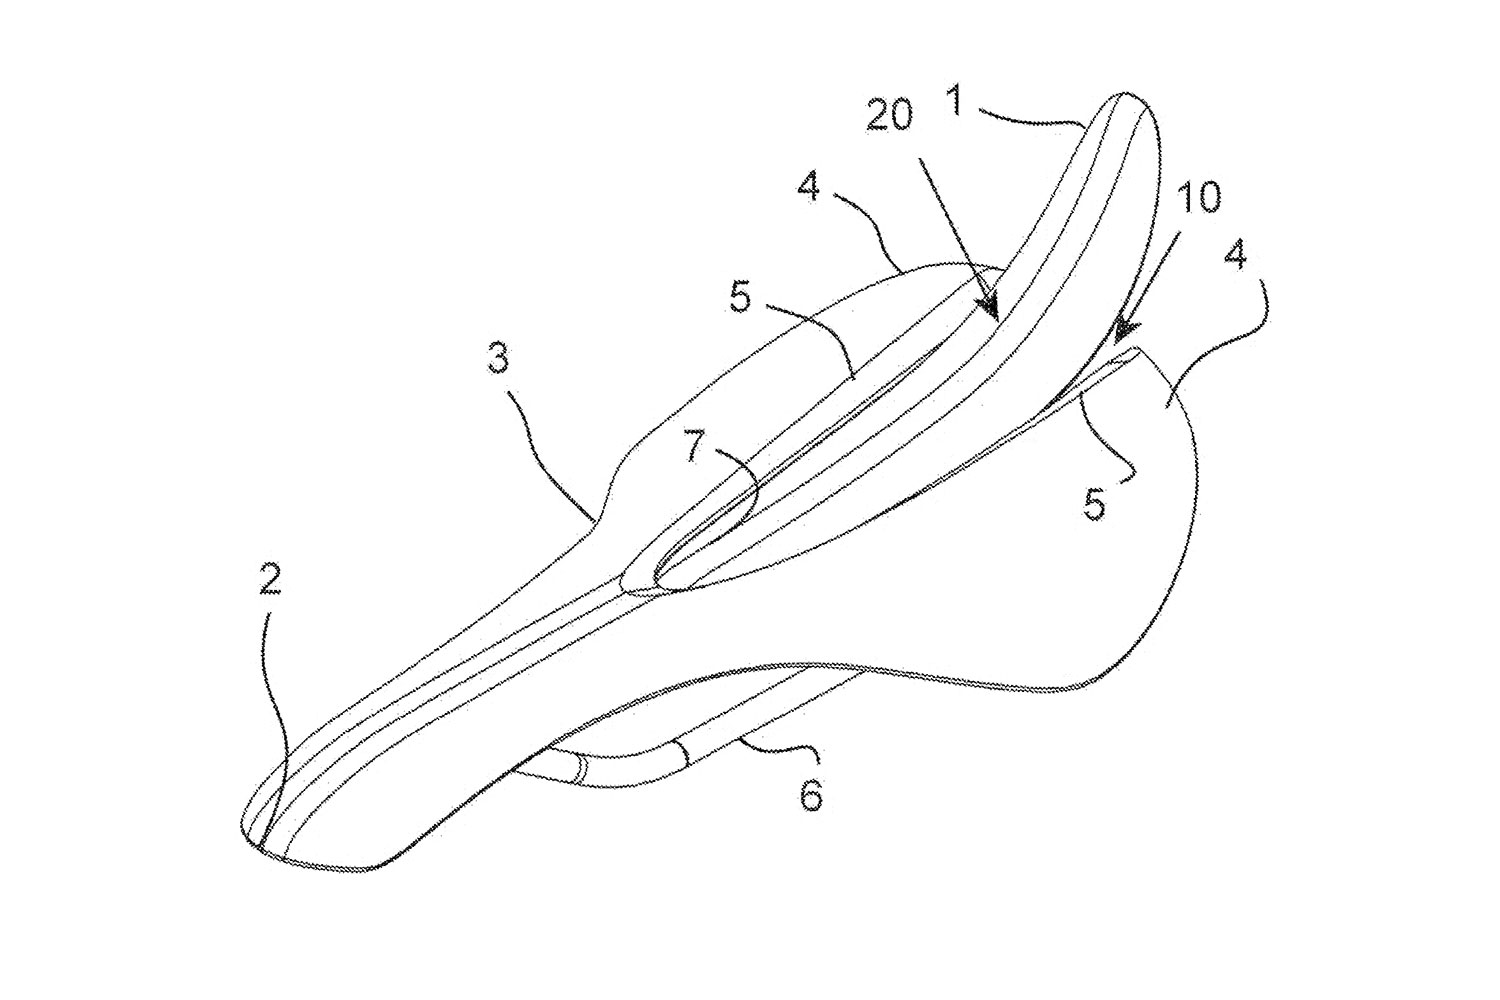 SaddleSpur unique ergonomic cycling saddle design with rear coccyx support, patent drawing